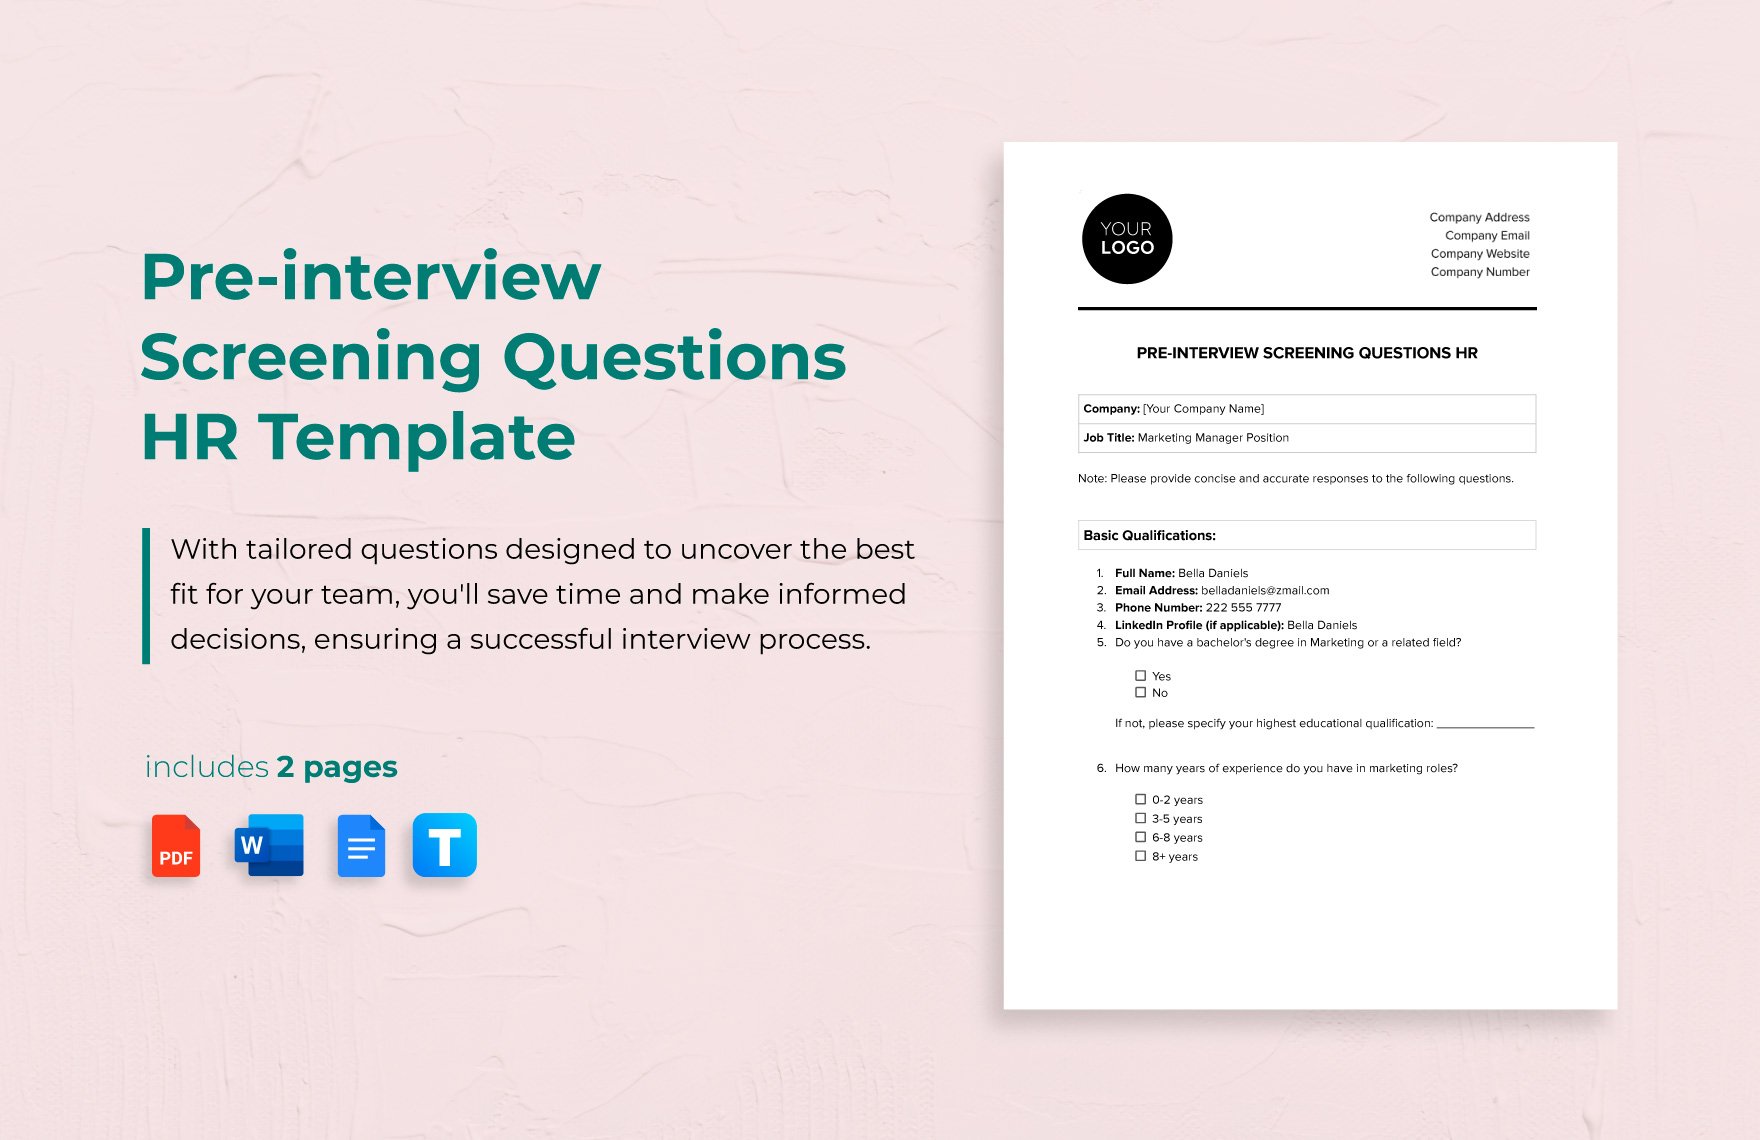 Pre-interview Screening Questions HR Template